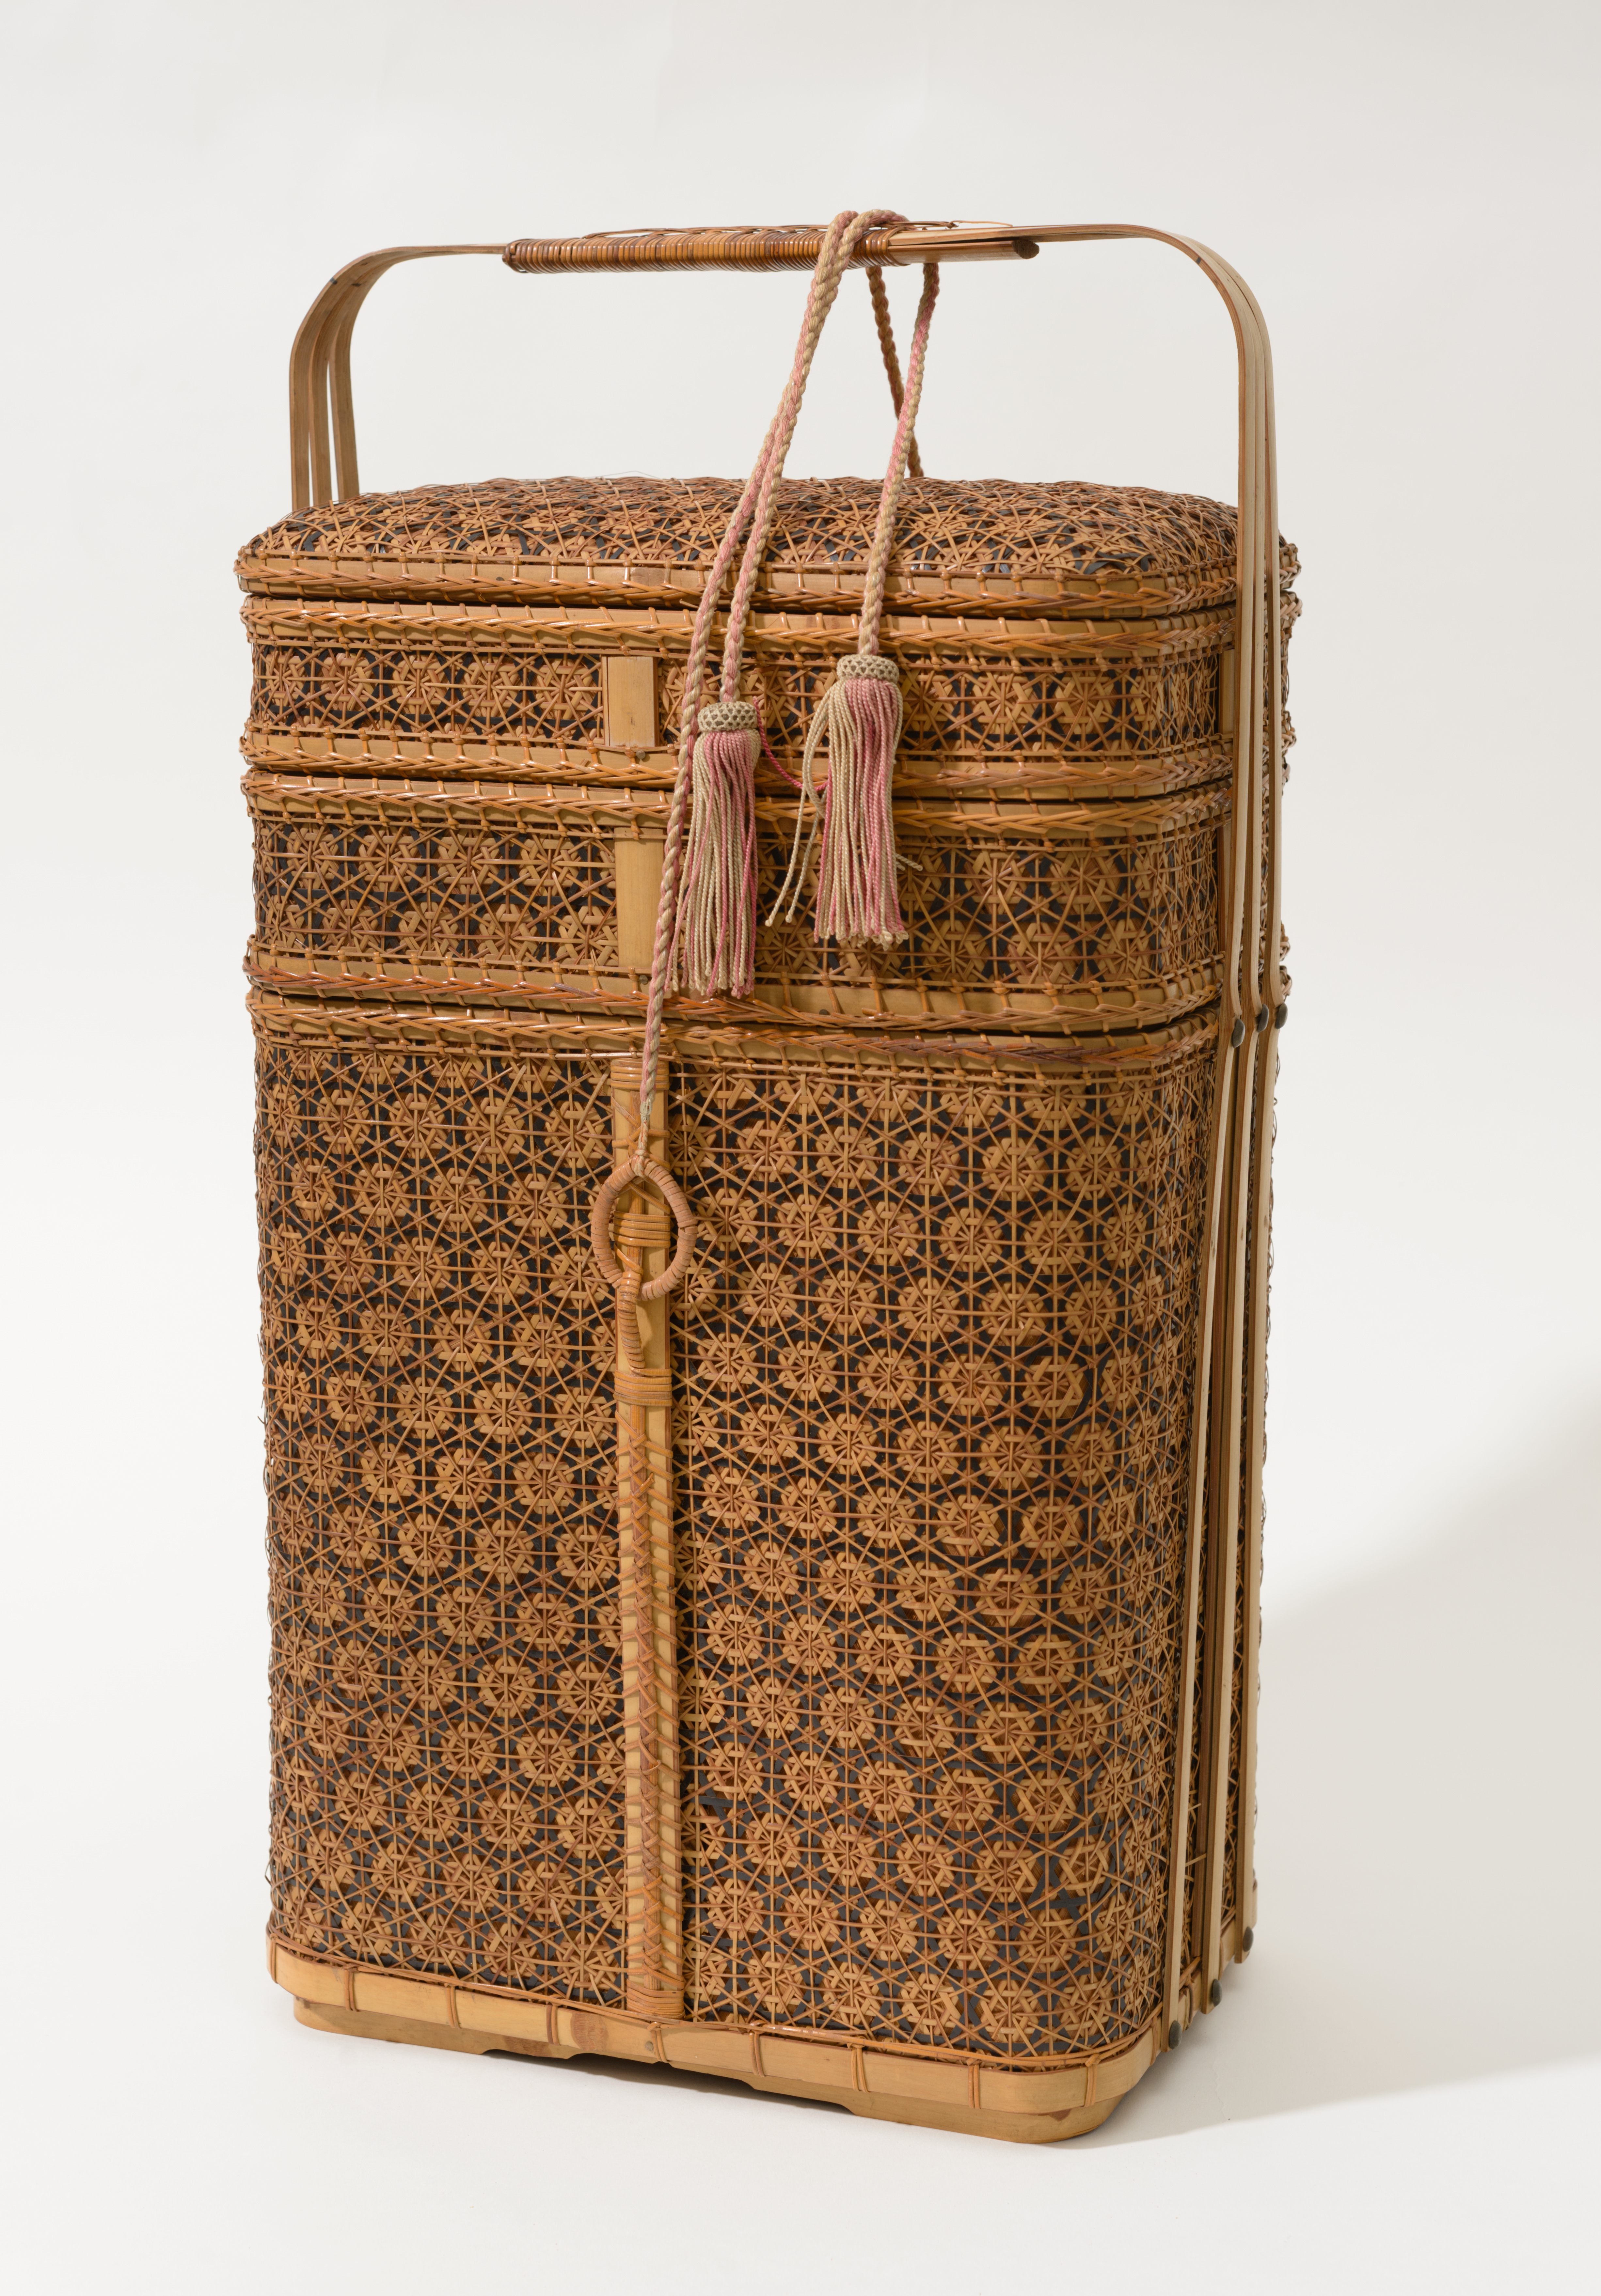 Three-tiered woven bamboo basket, with the silk tie reinstated to the repaired attachment loop. The tassel ties have been displayed looped and draped around the single handle which extends from the sides over the top of the basket.